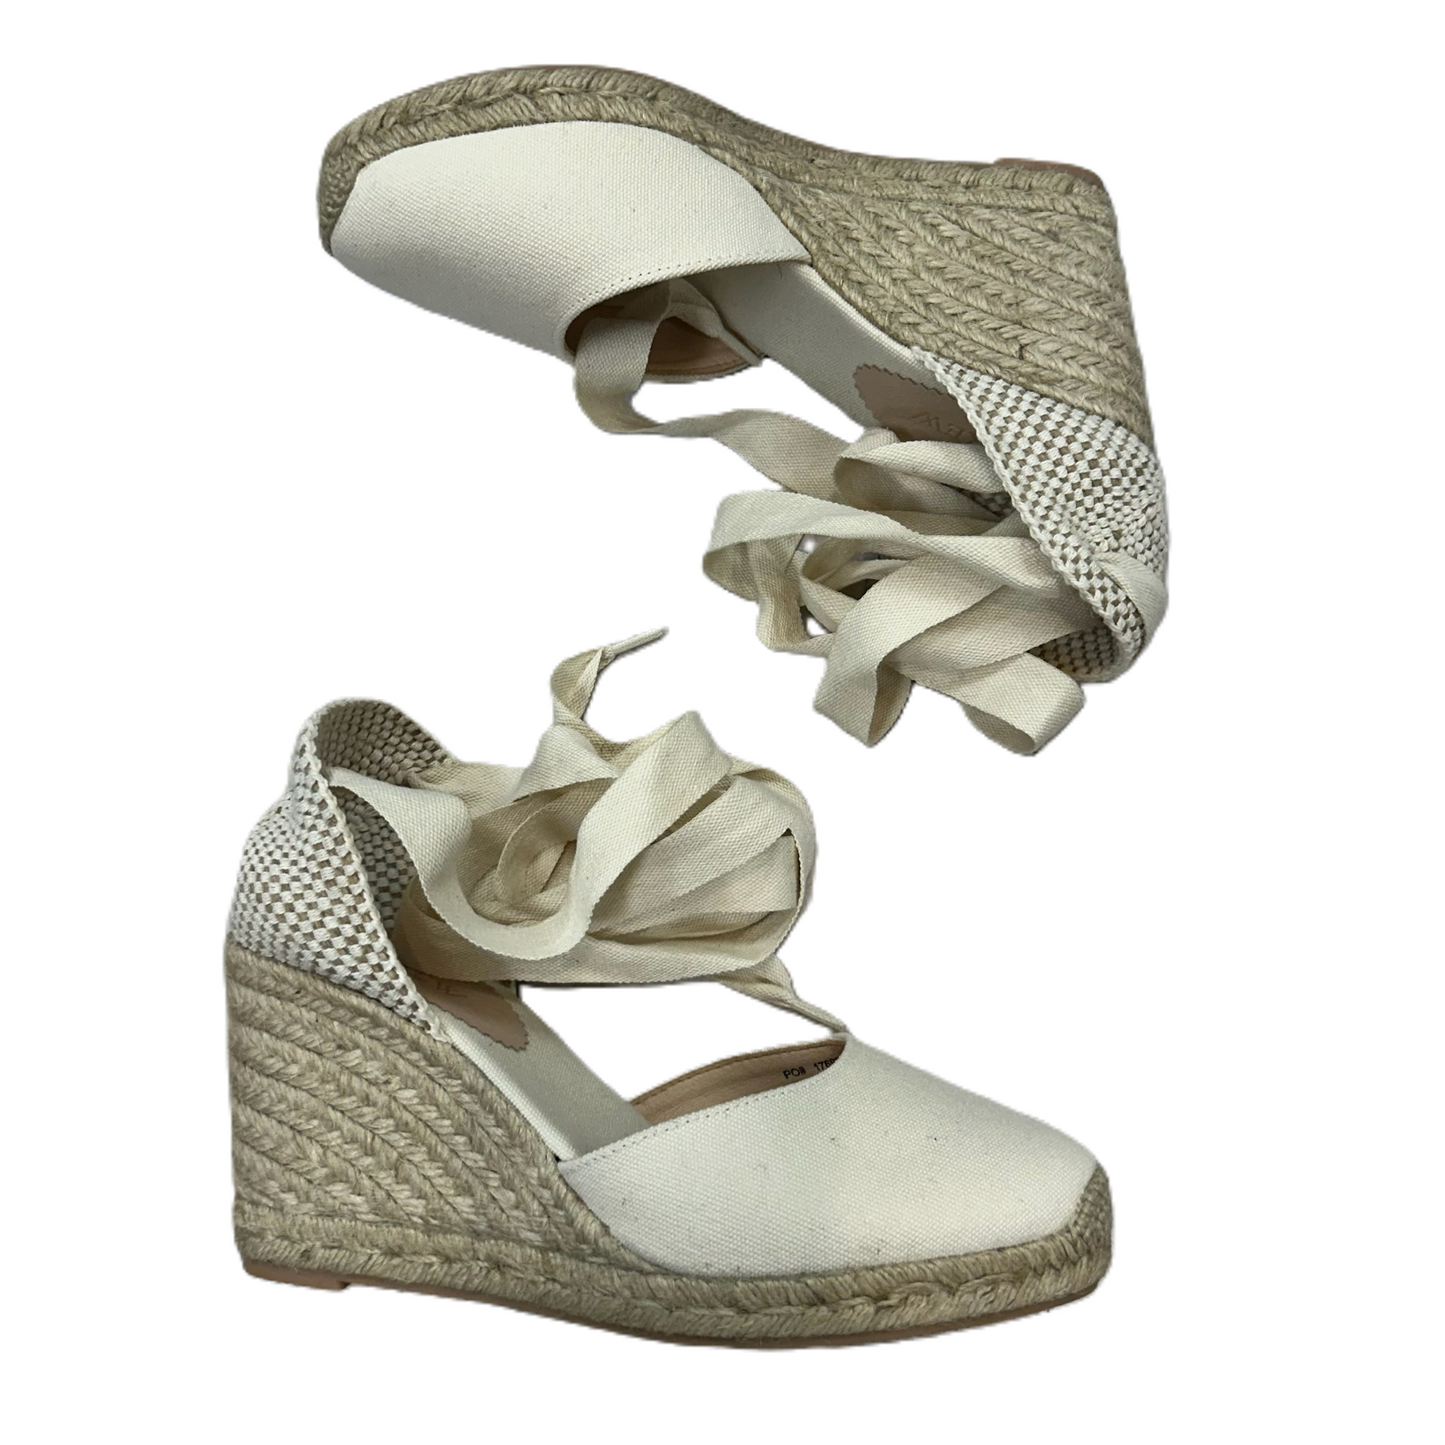 Cream Shoes Heels Wedge By J. Crew, Size: 8